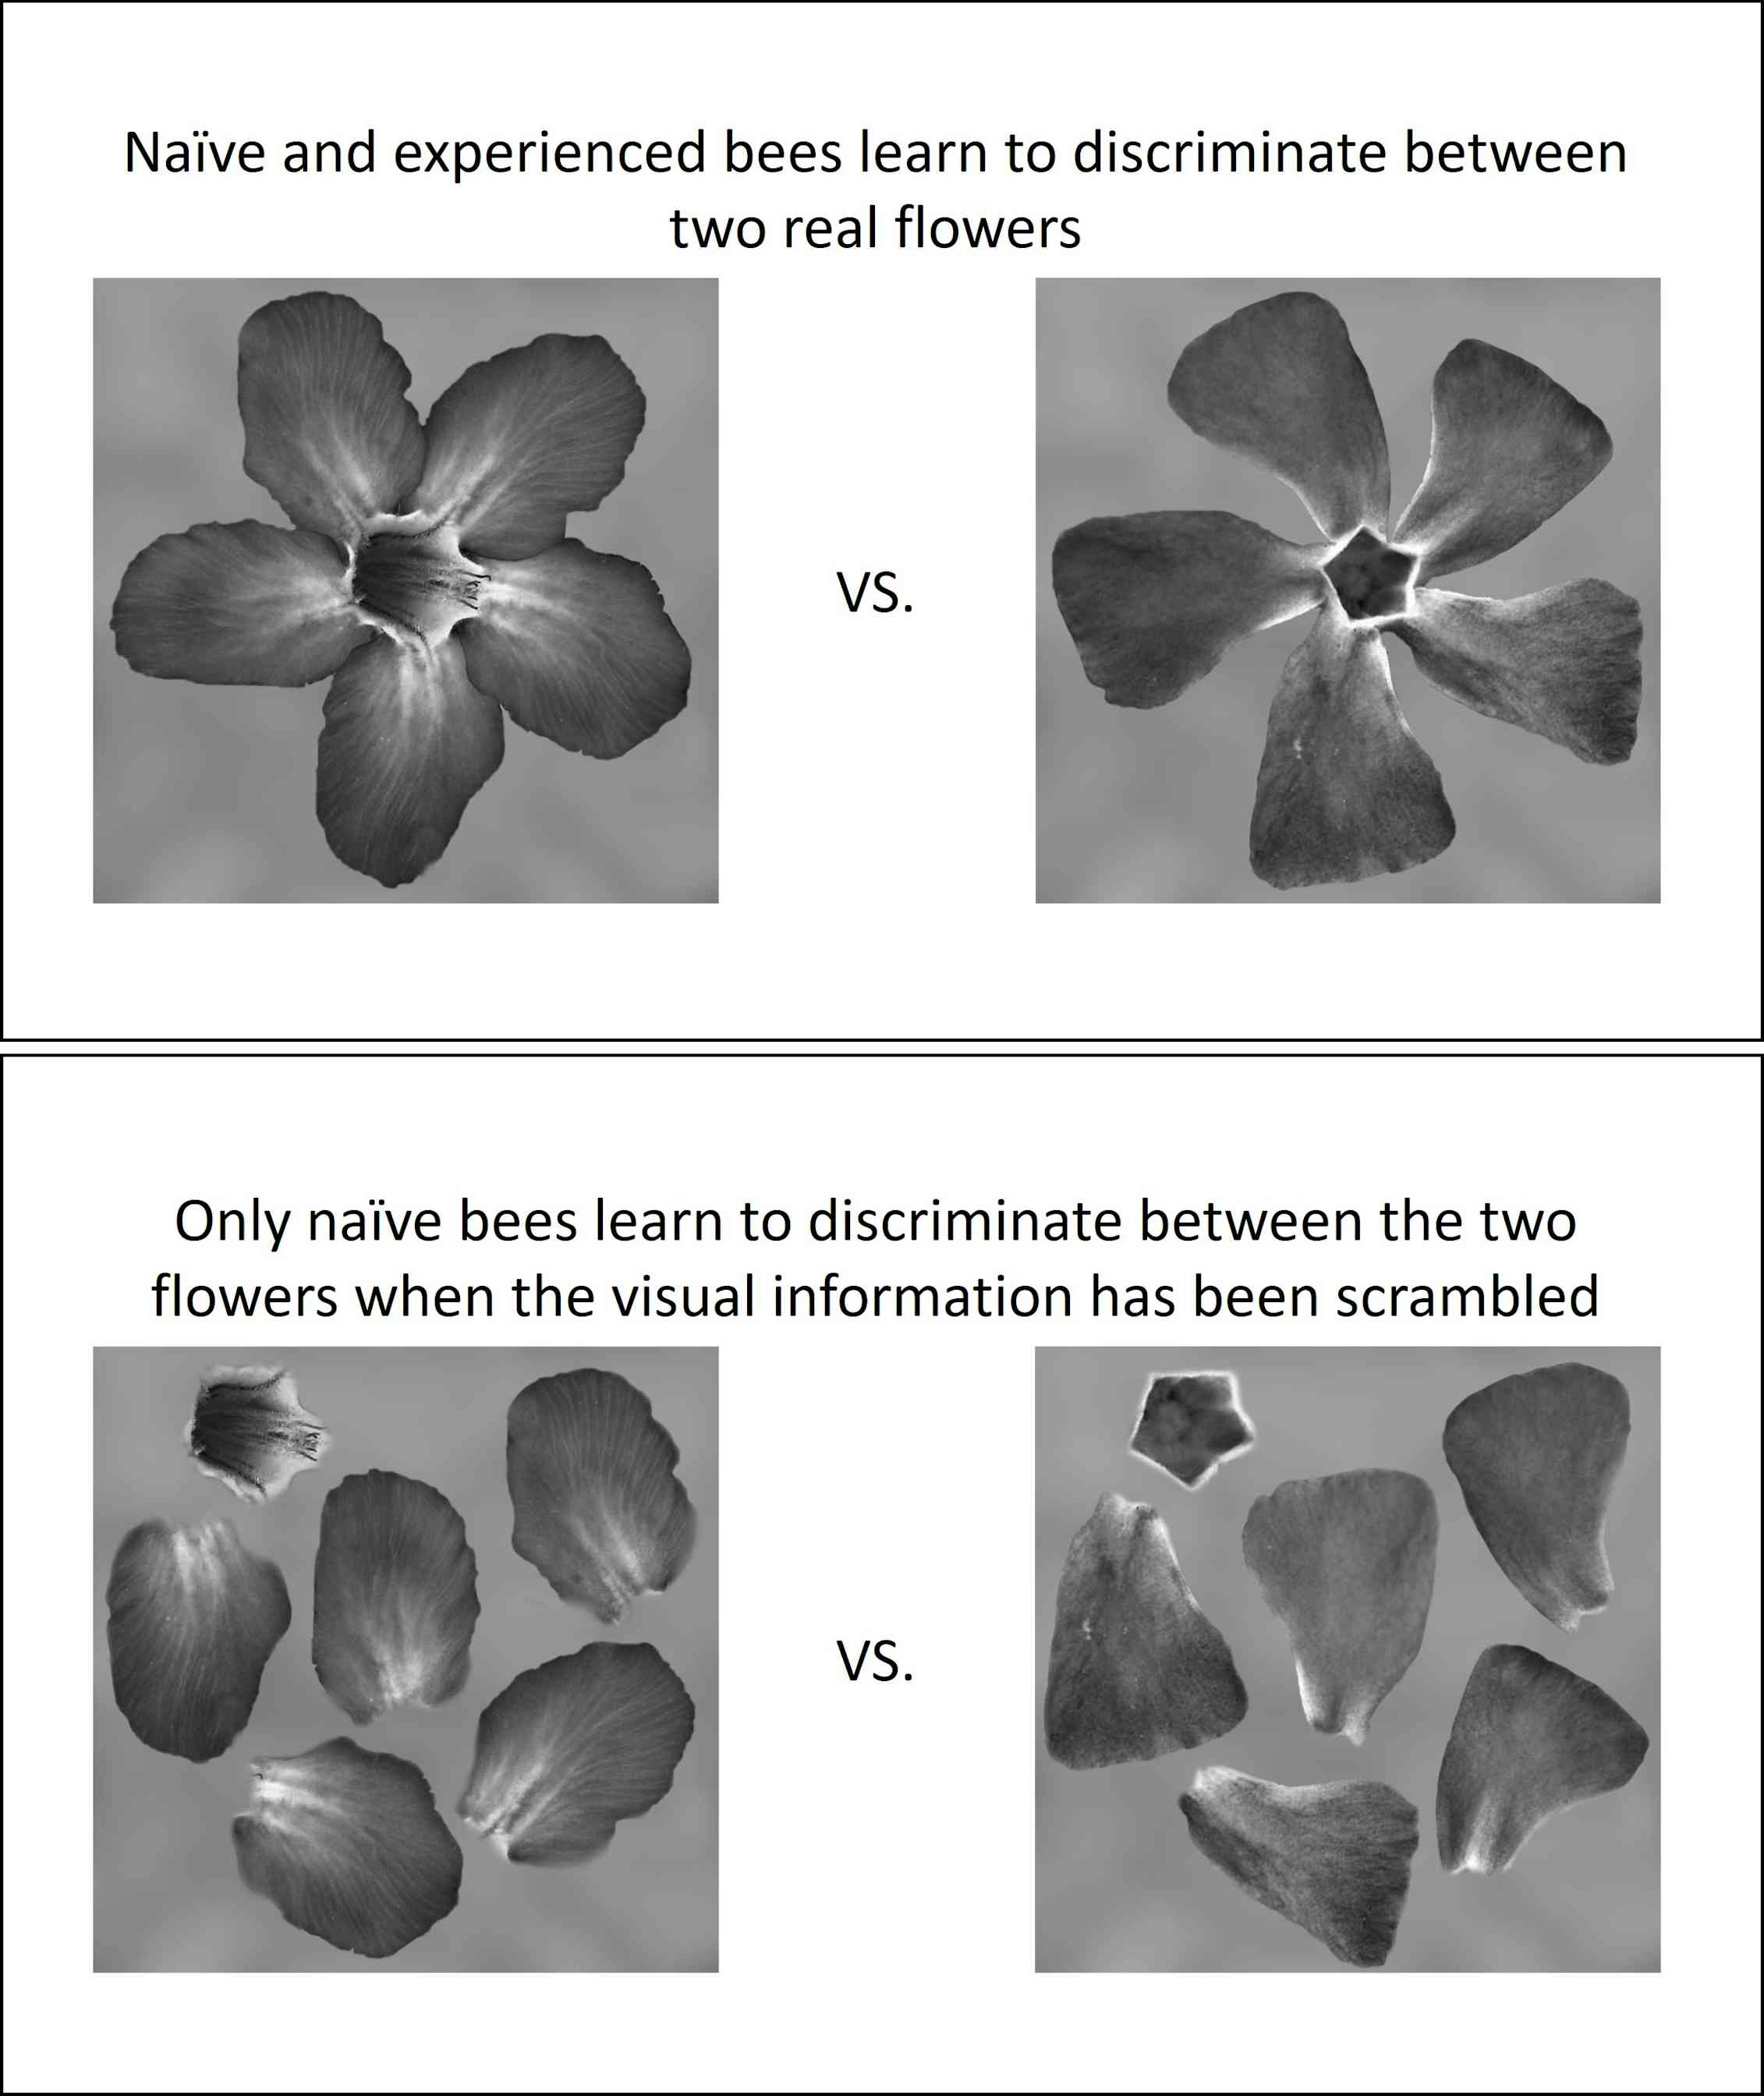 Images of the stimuli used. On the top there are two real flower images in greyscale. On the bottom is the same visual information but scrambled so it doesn't resemble a flower.